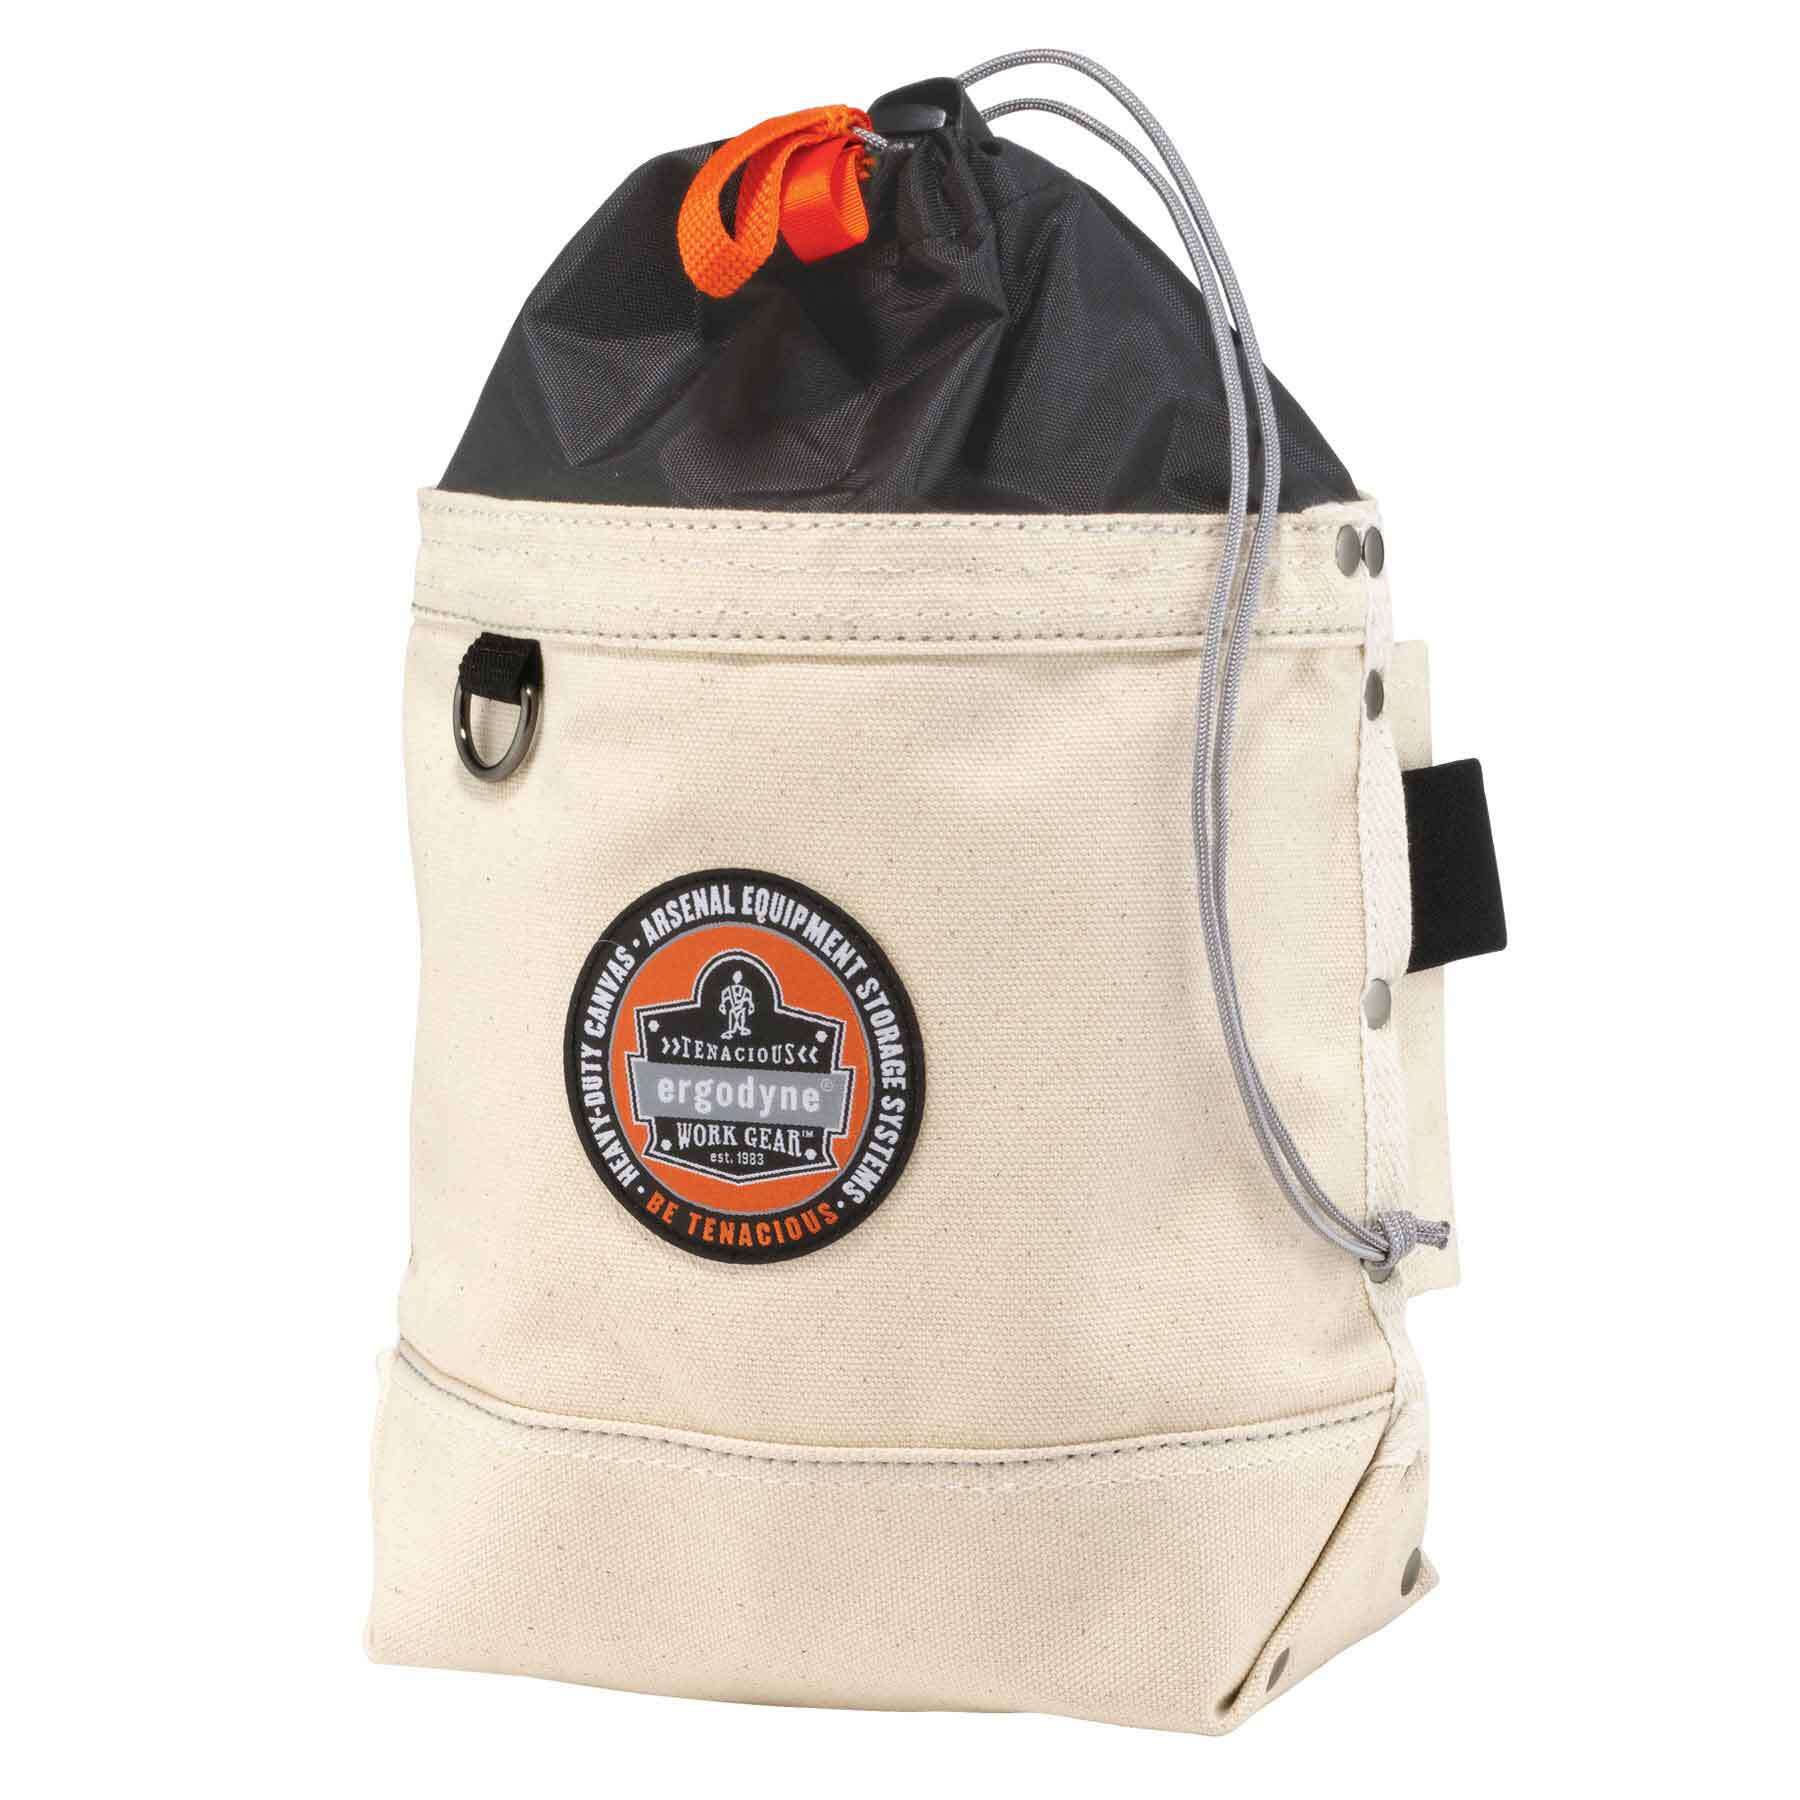 ARSENAL CANVAS AERIAL TOOL POUCH